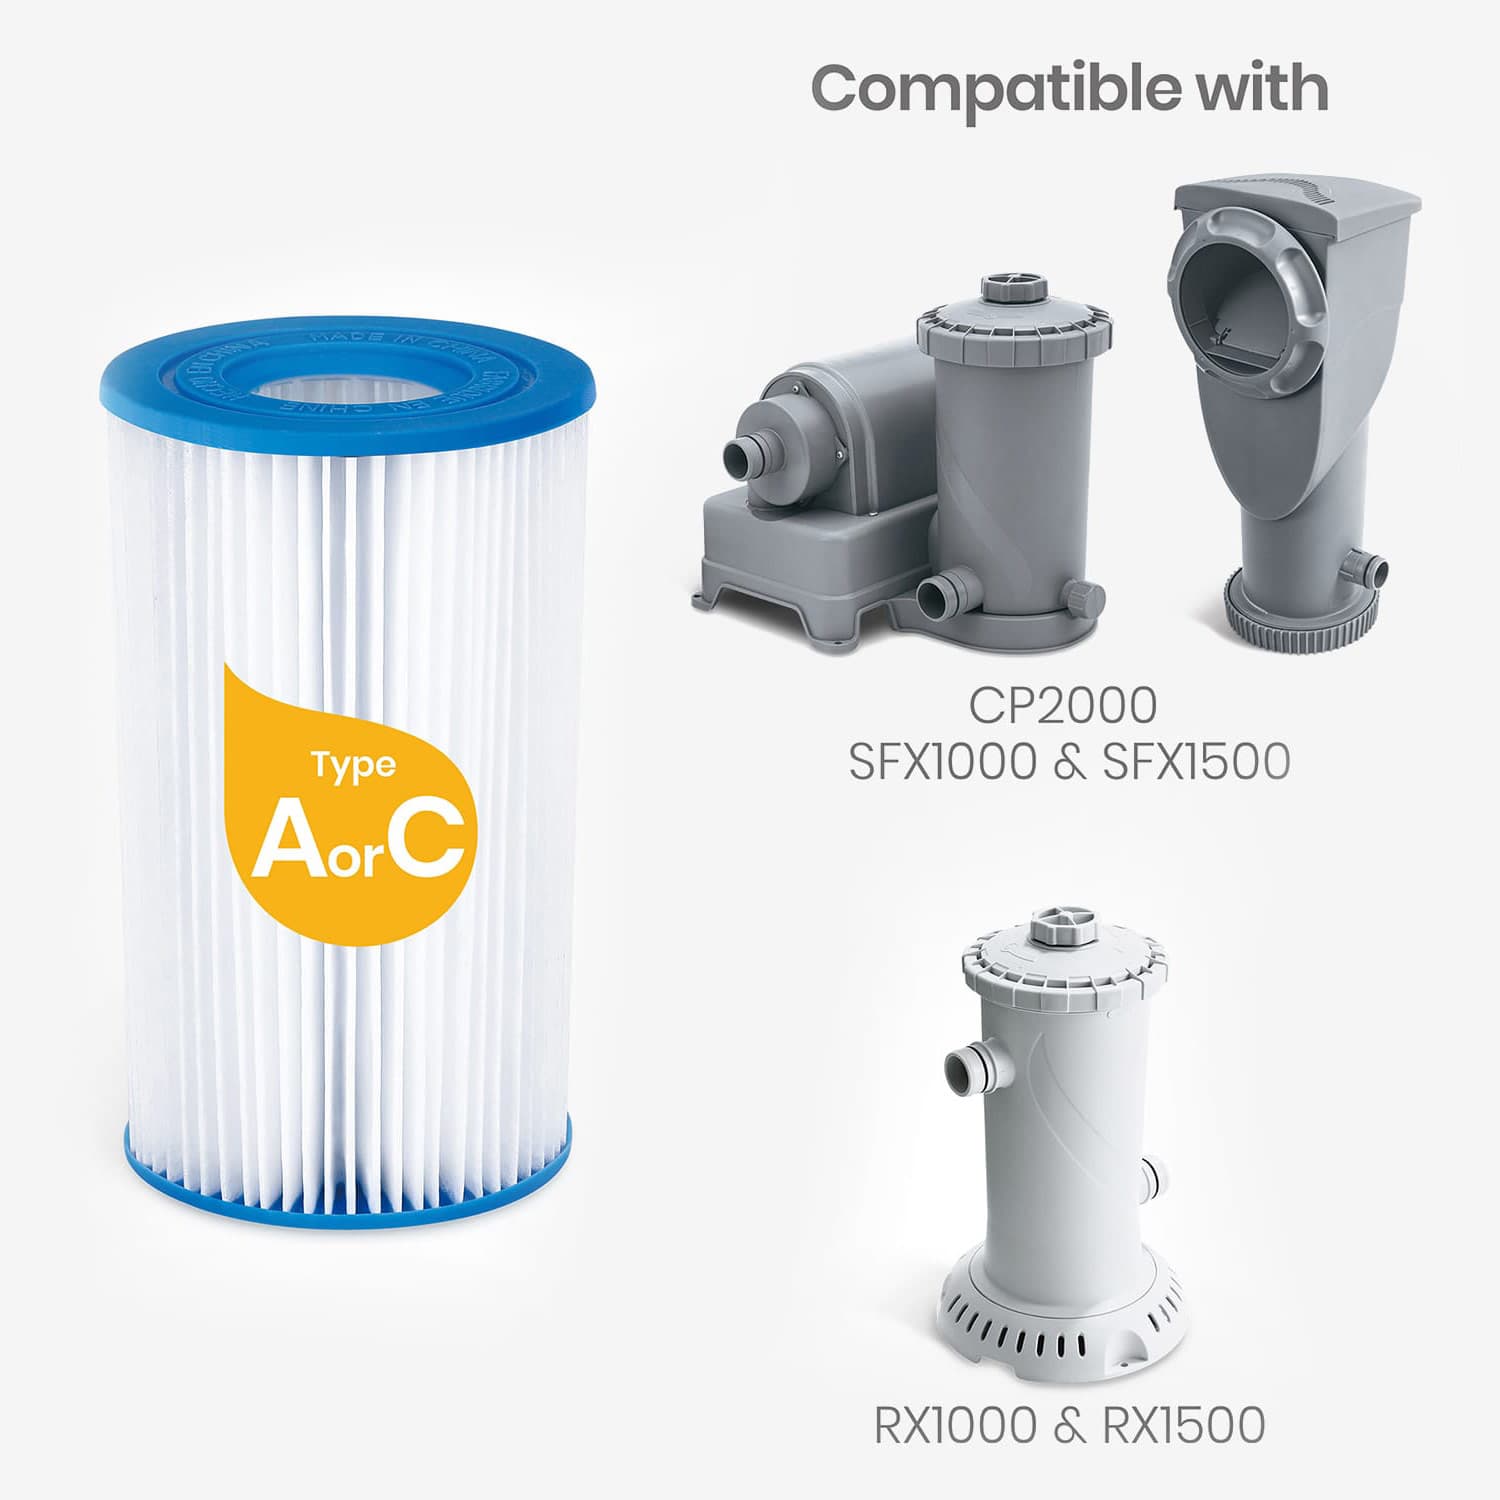 Funsicle Type A/C Filter Cartridge 4-pack compatibility